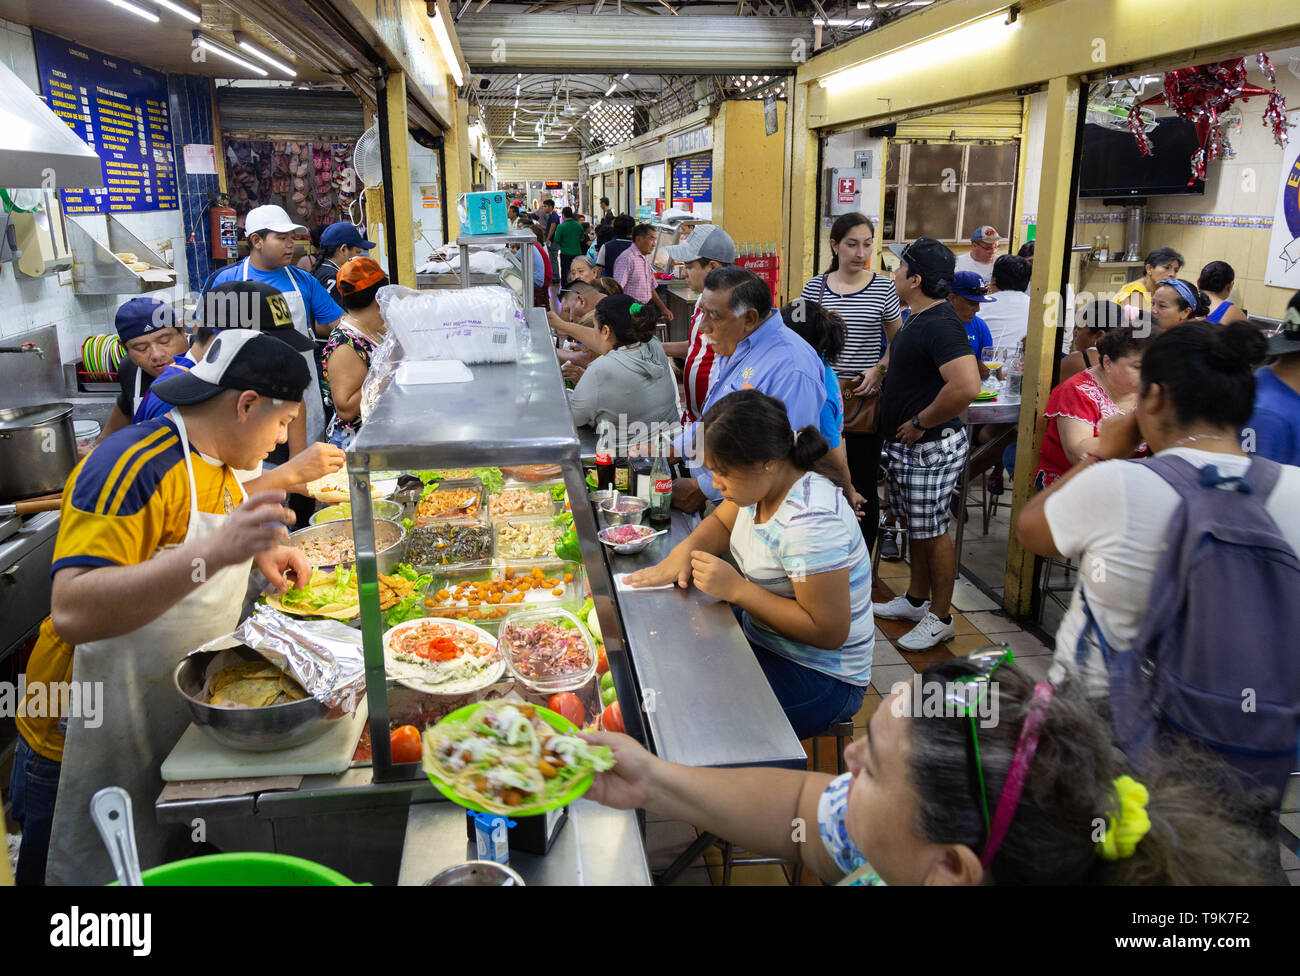 Mexico lifestyle - local people eating in the food market, Merida, Yucatan, Mexico Latin America Stock Photo